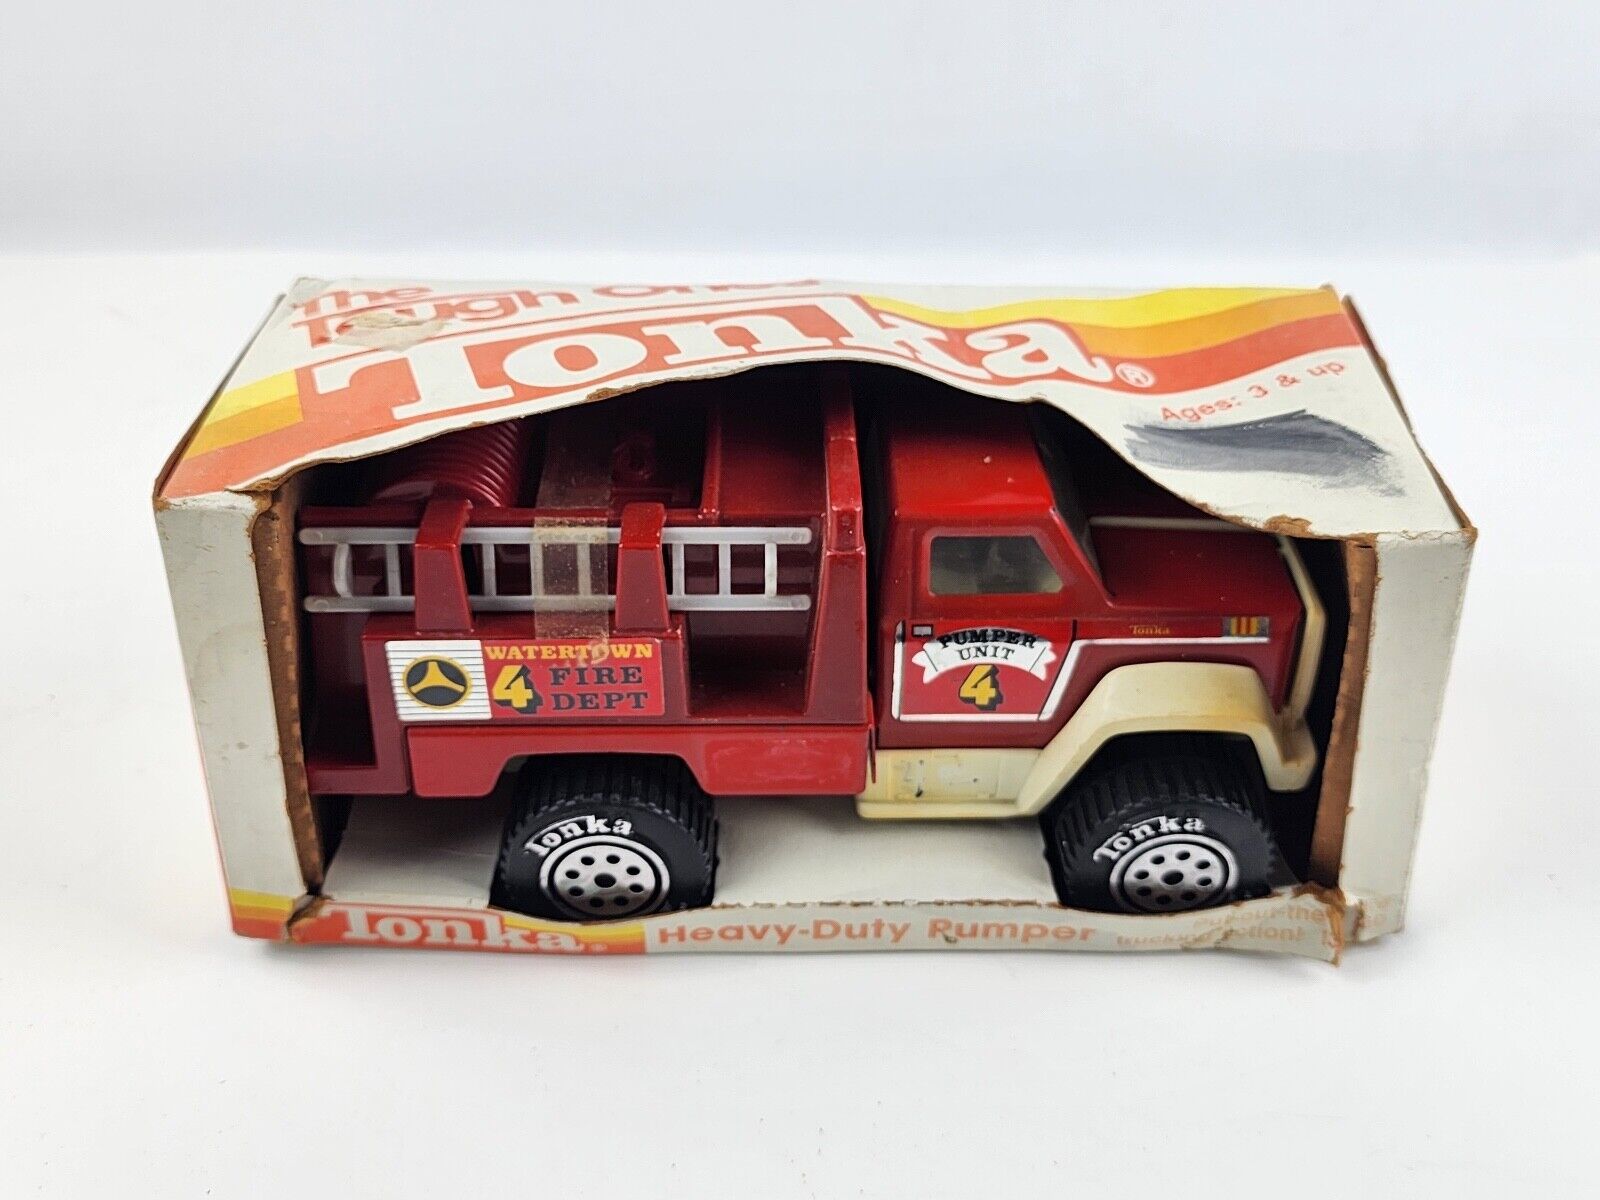 Primary image for 1983 Tonka Tough Ones Heavy Duty Pumper Fire Truck New in (poor) box